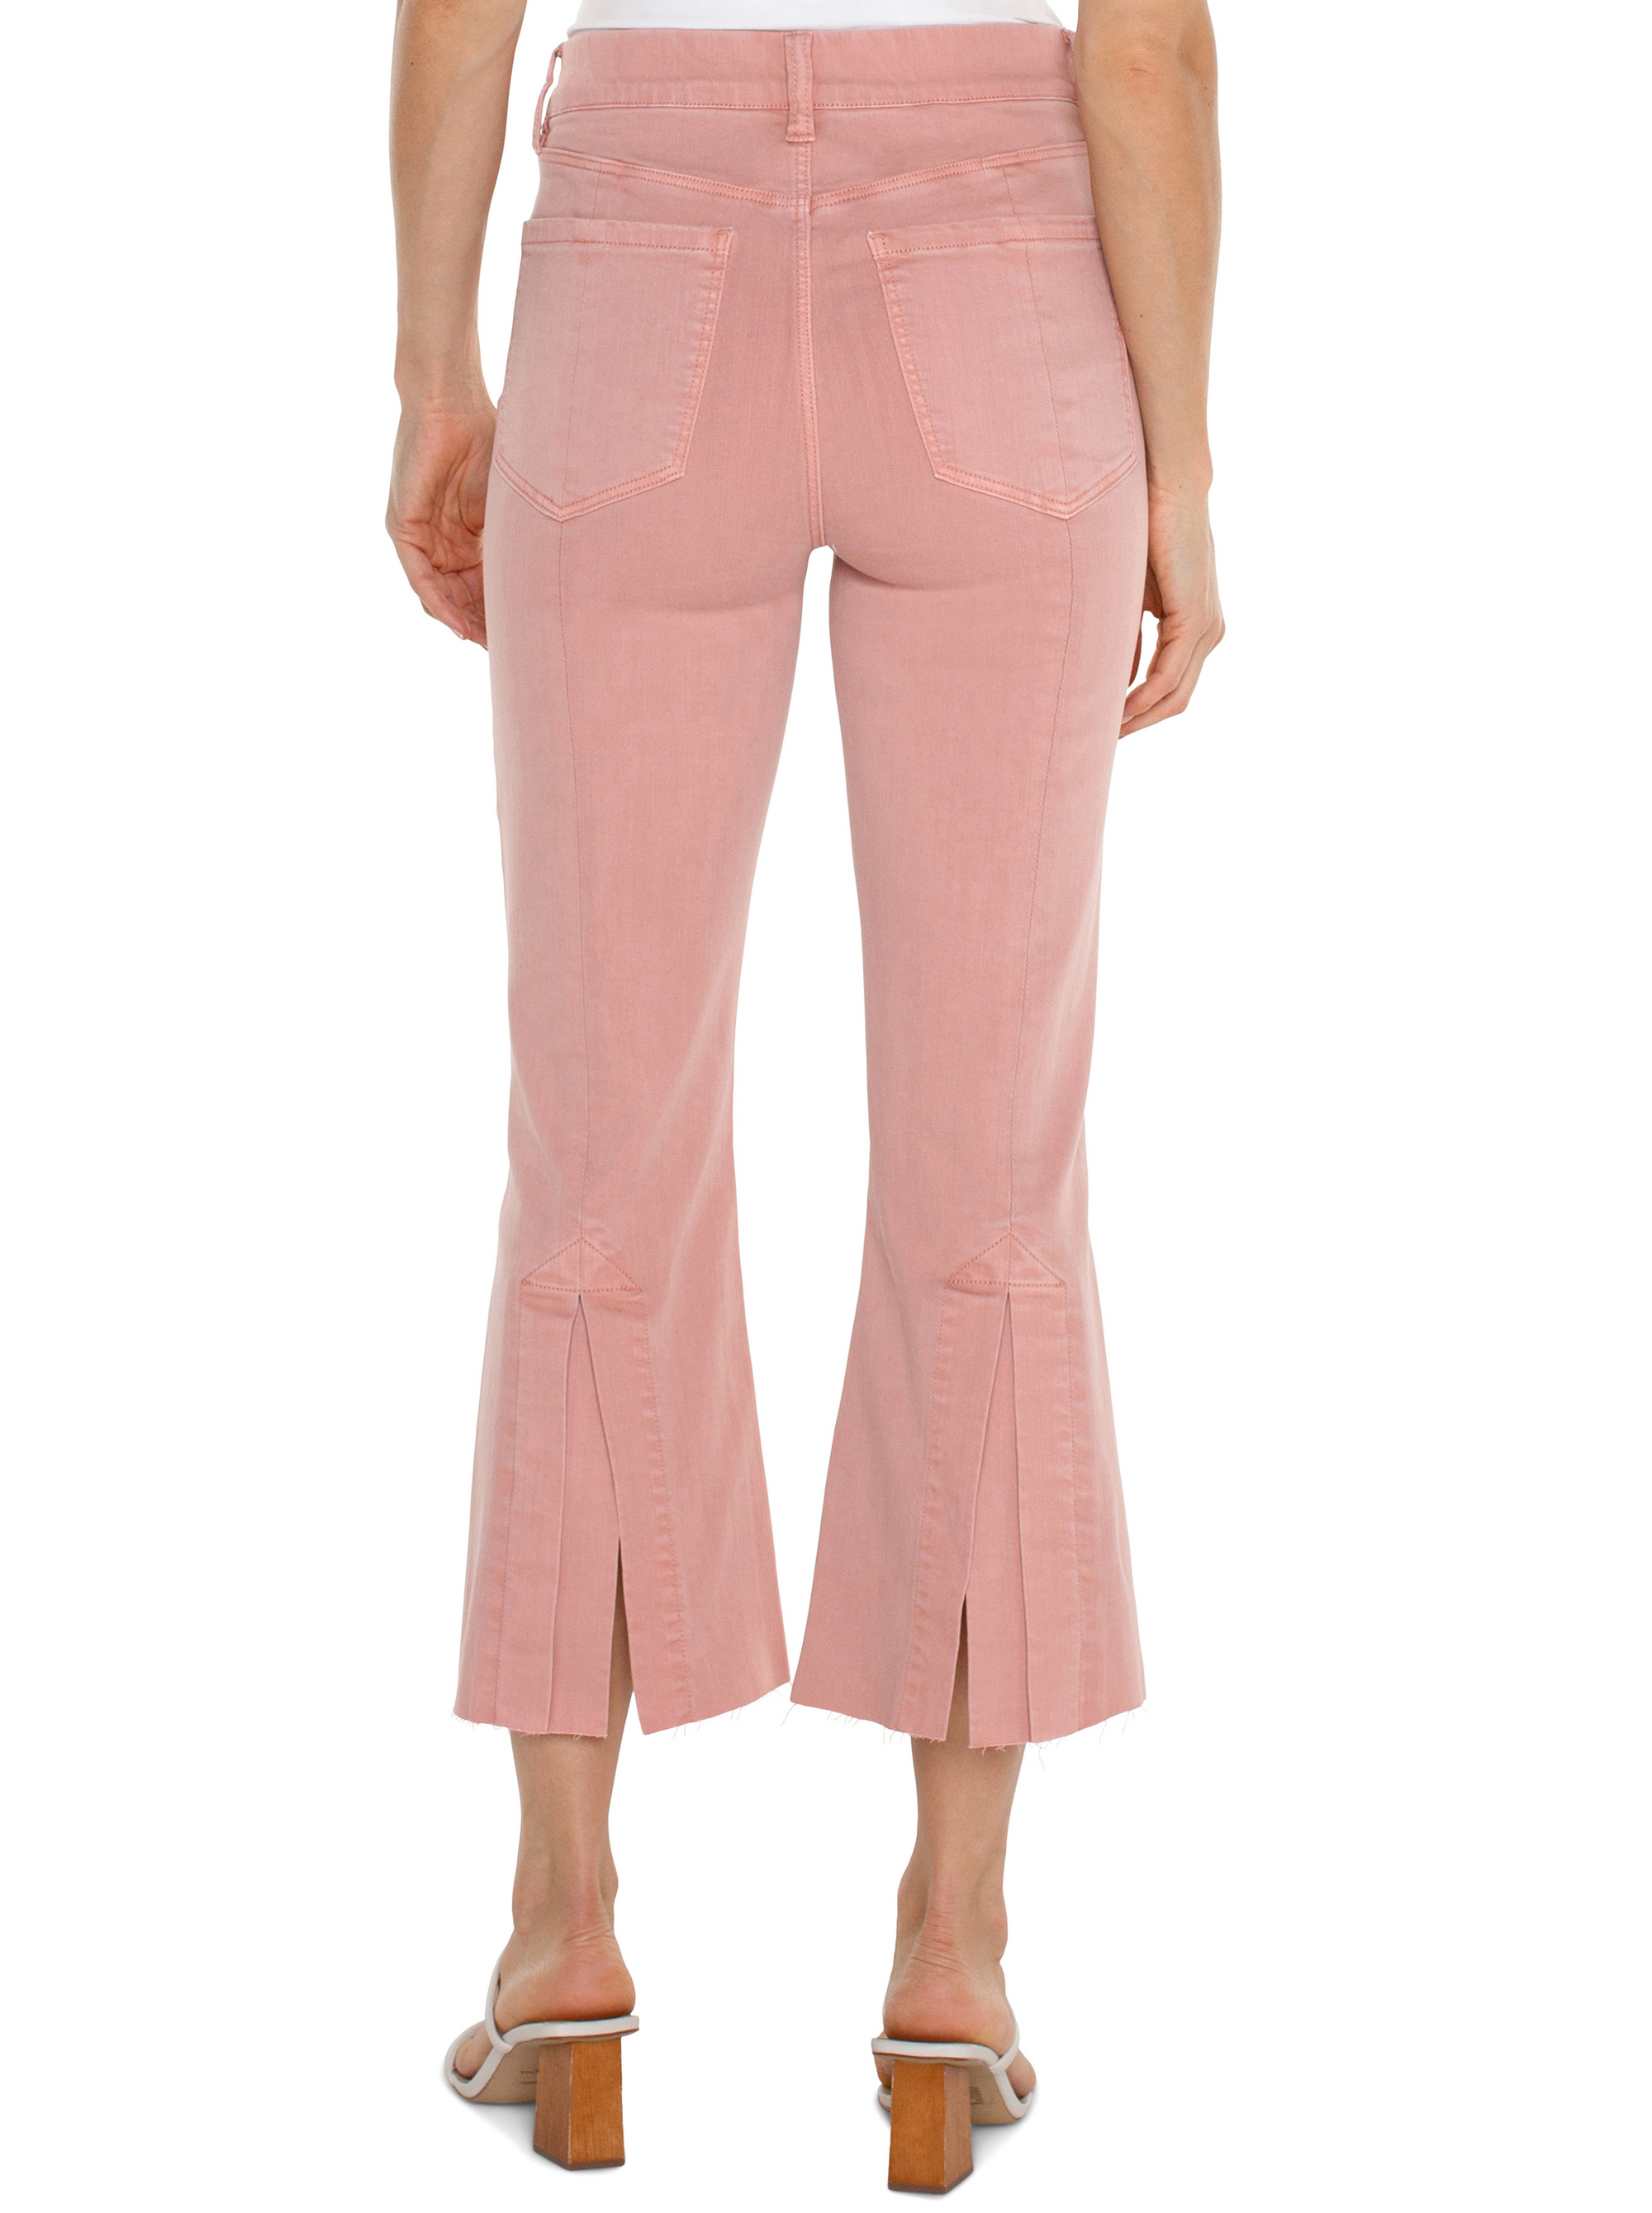 Liverpool Rose Gia Glider Crop Flare